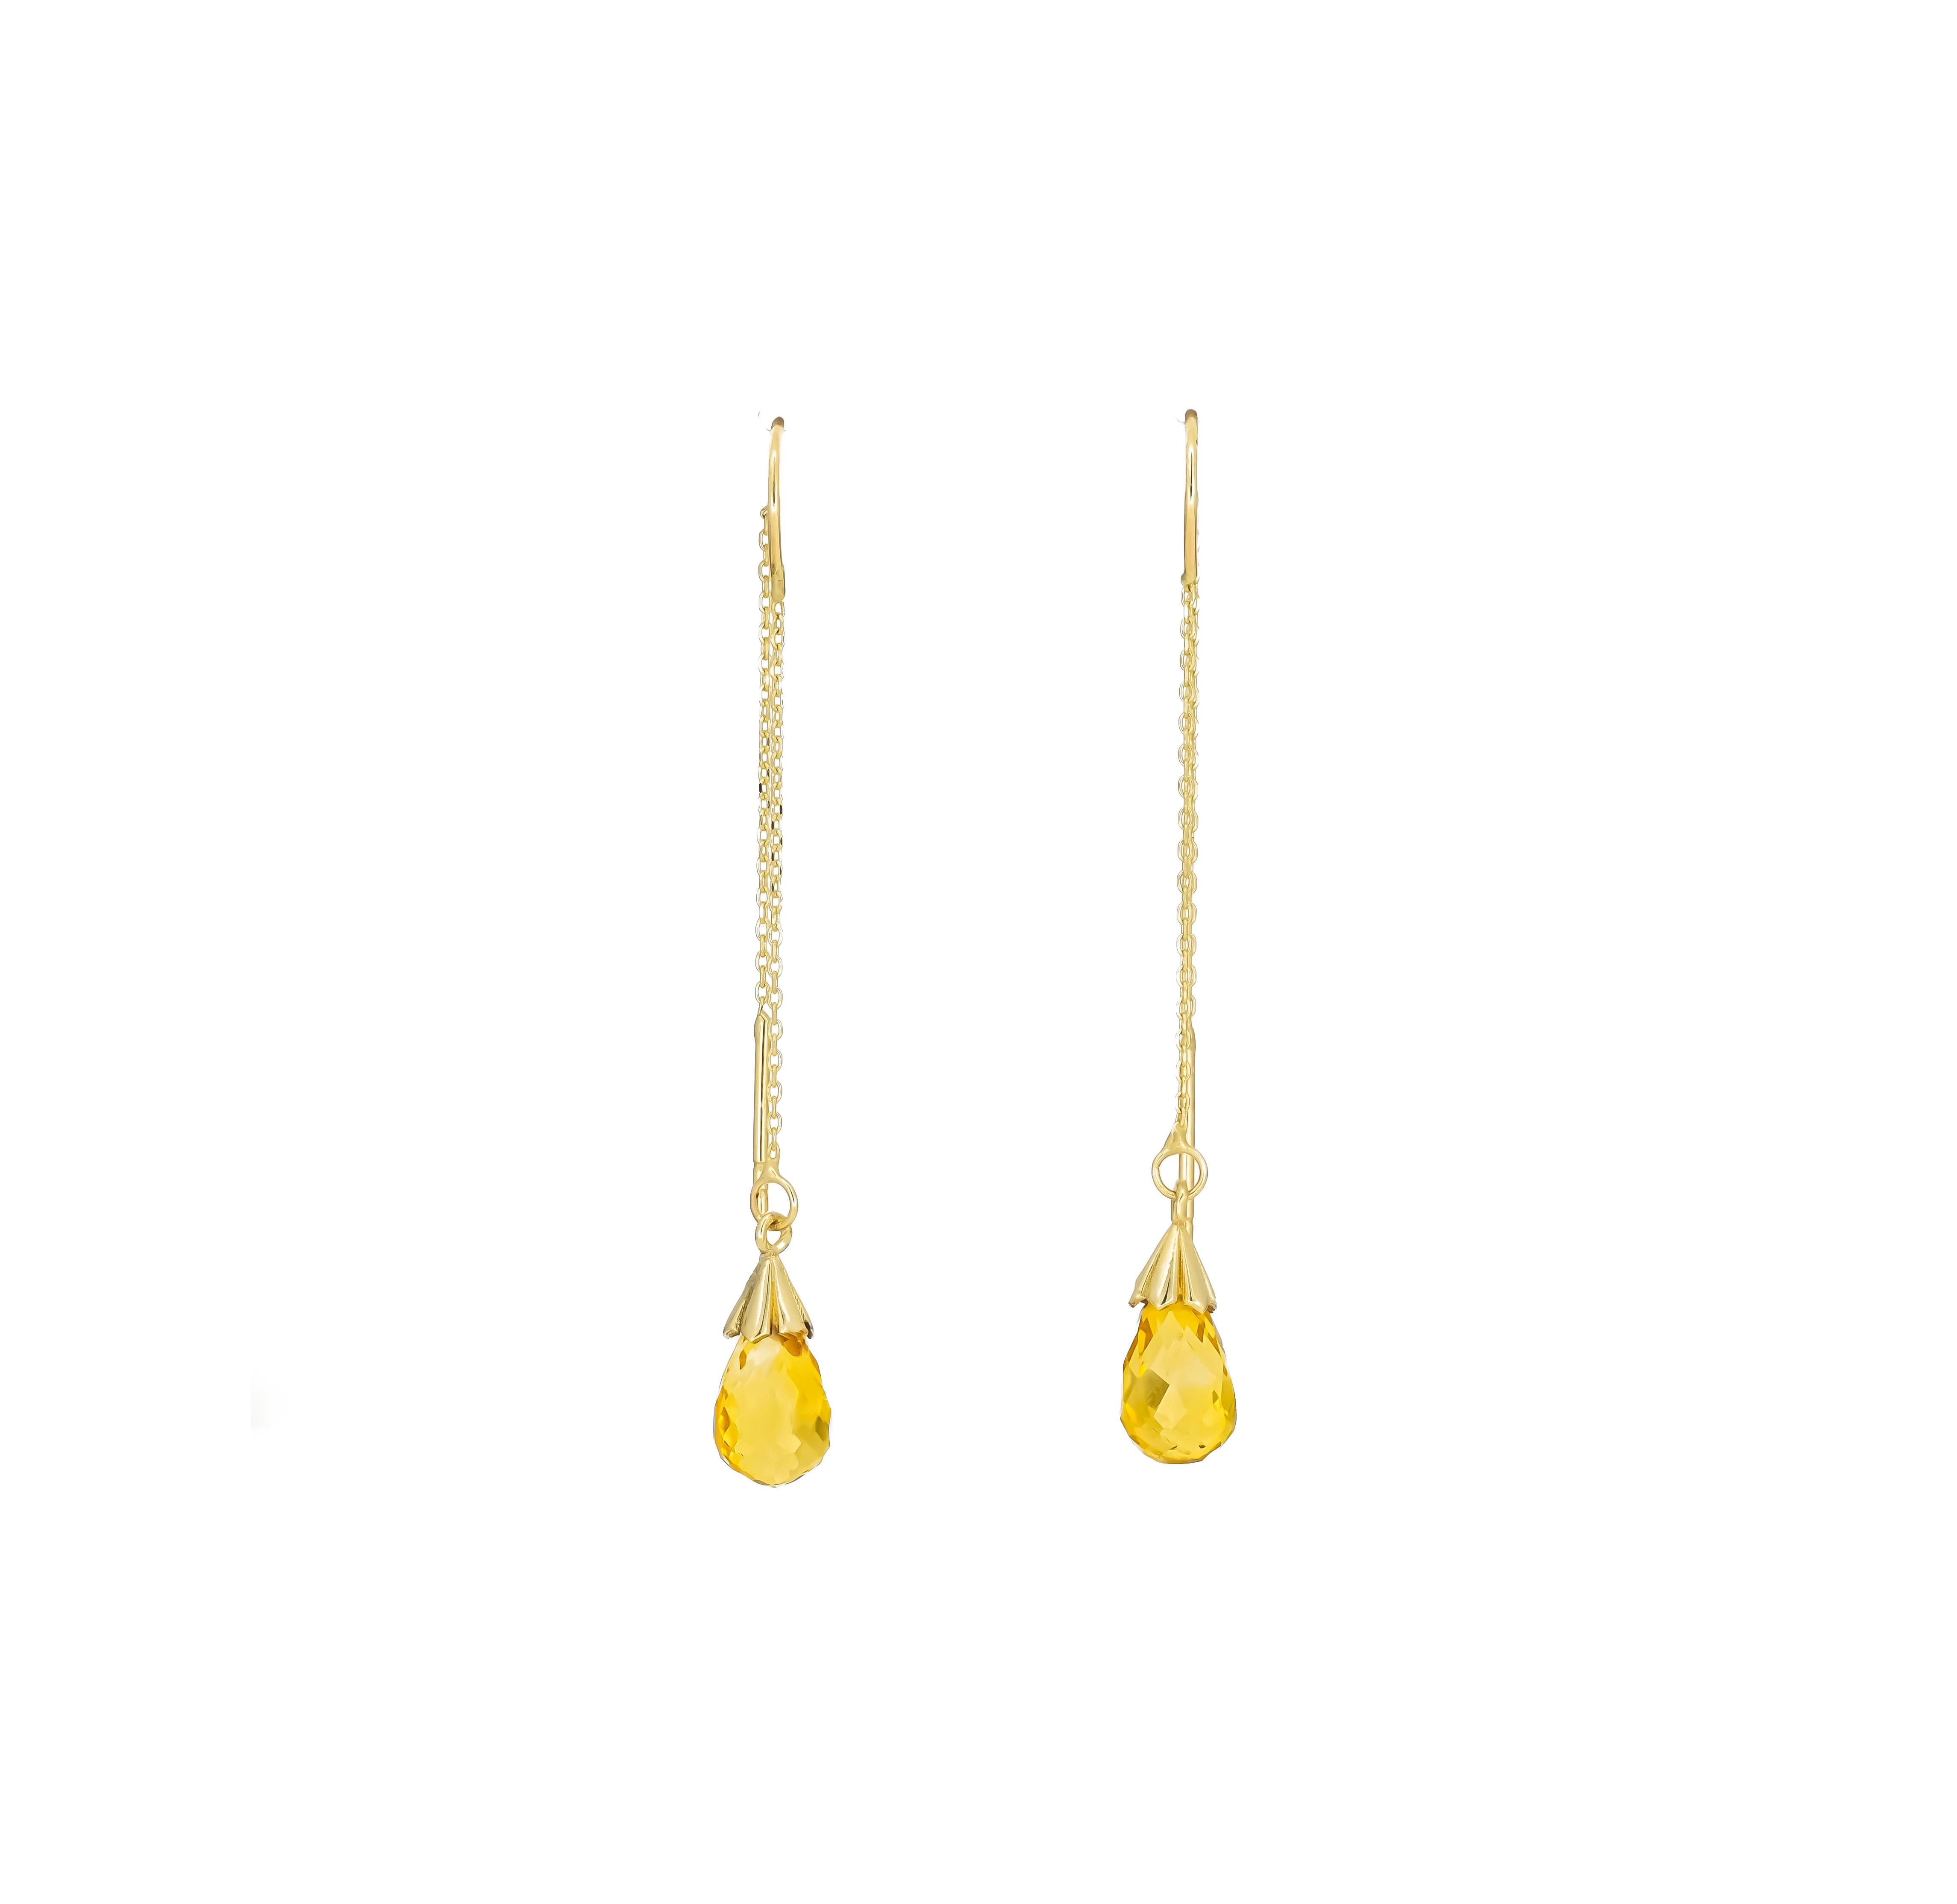 14 k yellow gold Threader earrings with citrines. Thin Cable Chain citrine earrings.  U Shape Ear Threaders. 
Everyday citrine earrings. Briolette citrine earrings. Citrine Drop earrings. Citrine gold earrings. 
Metal: 14k yellow gold
Weight: 1.81